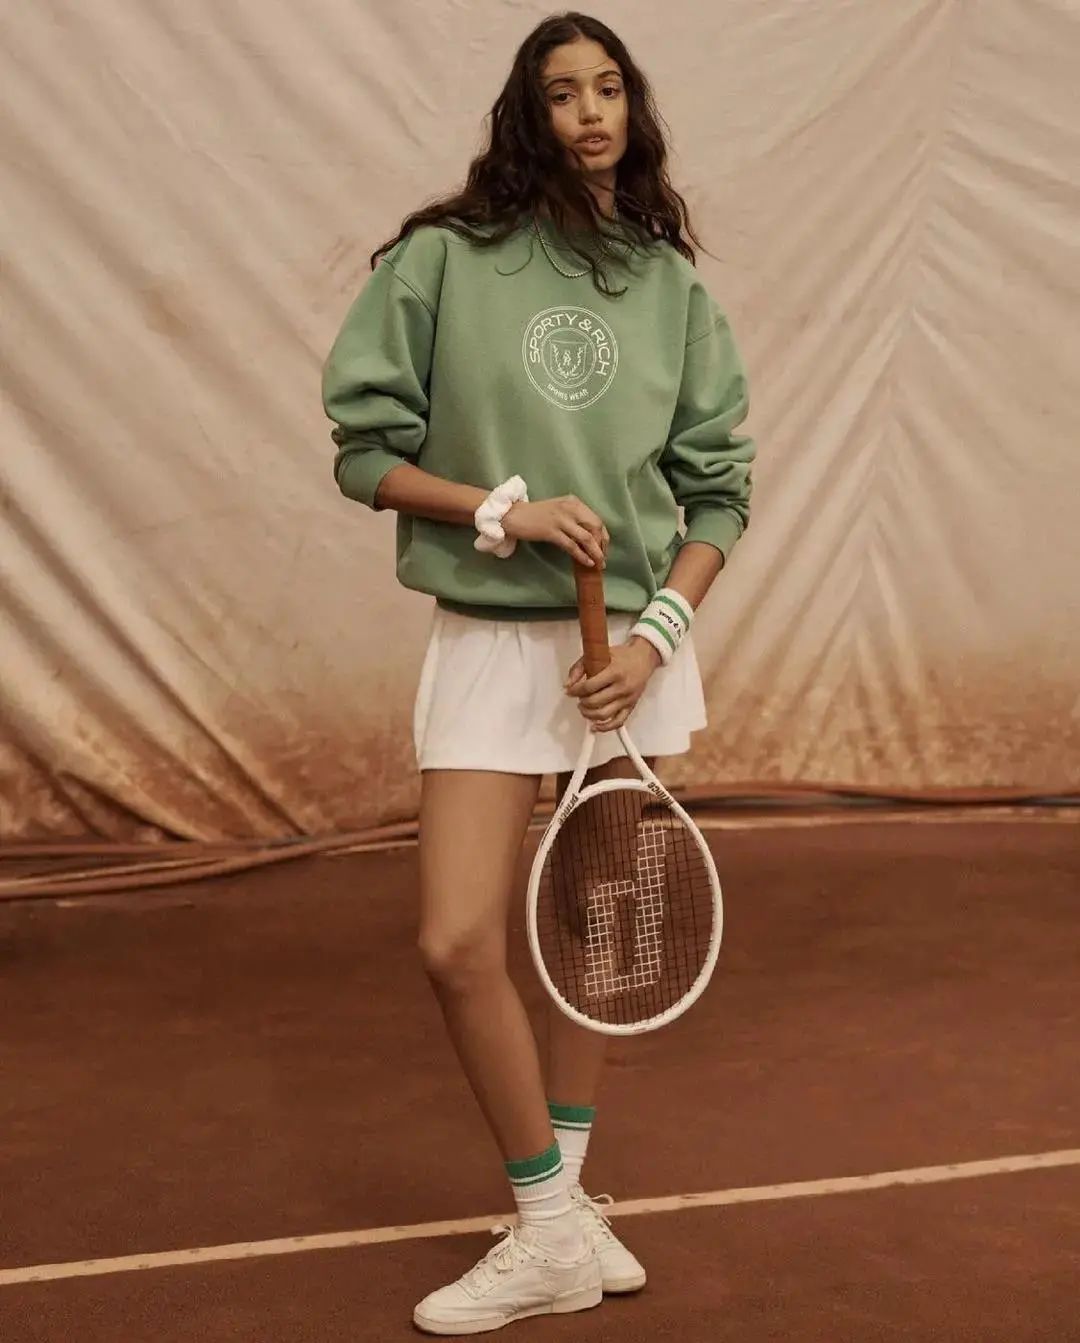 how to style a skort tennis outfit